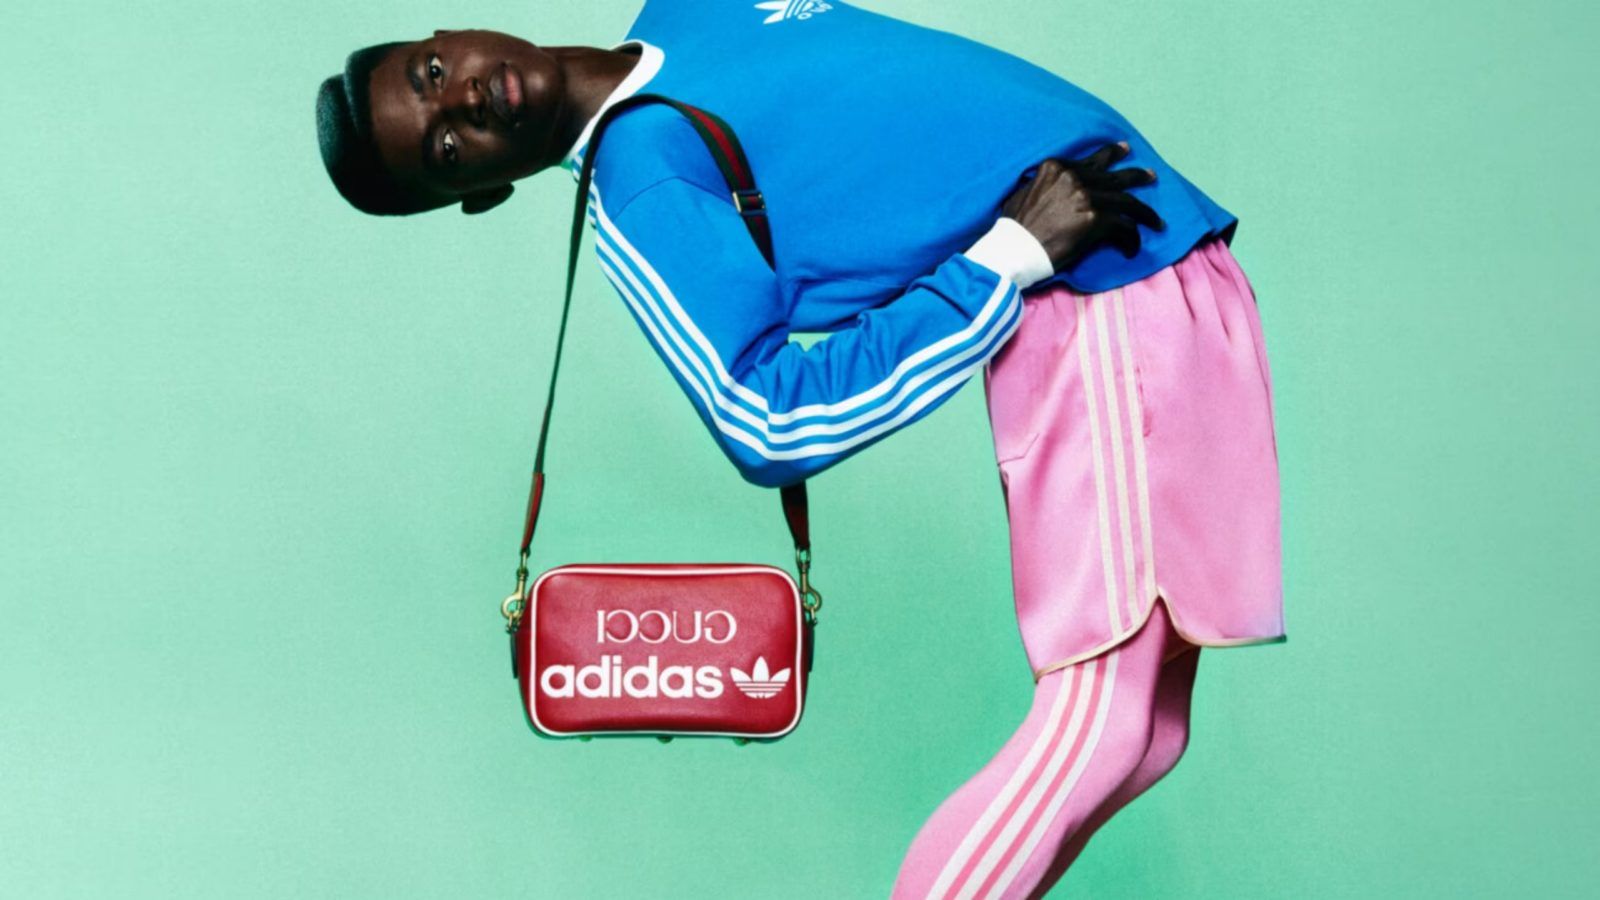 adidas x Gucci is almost here